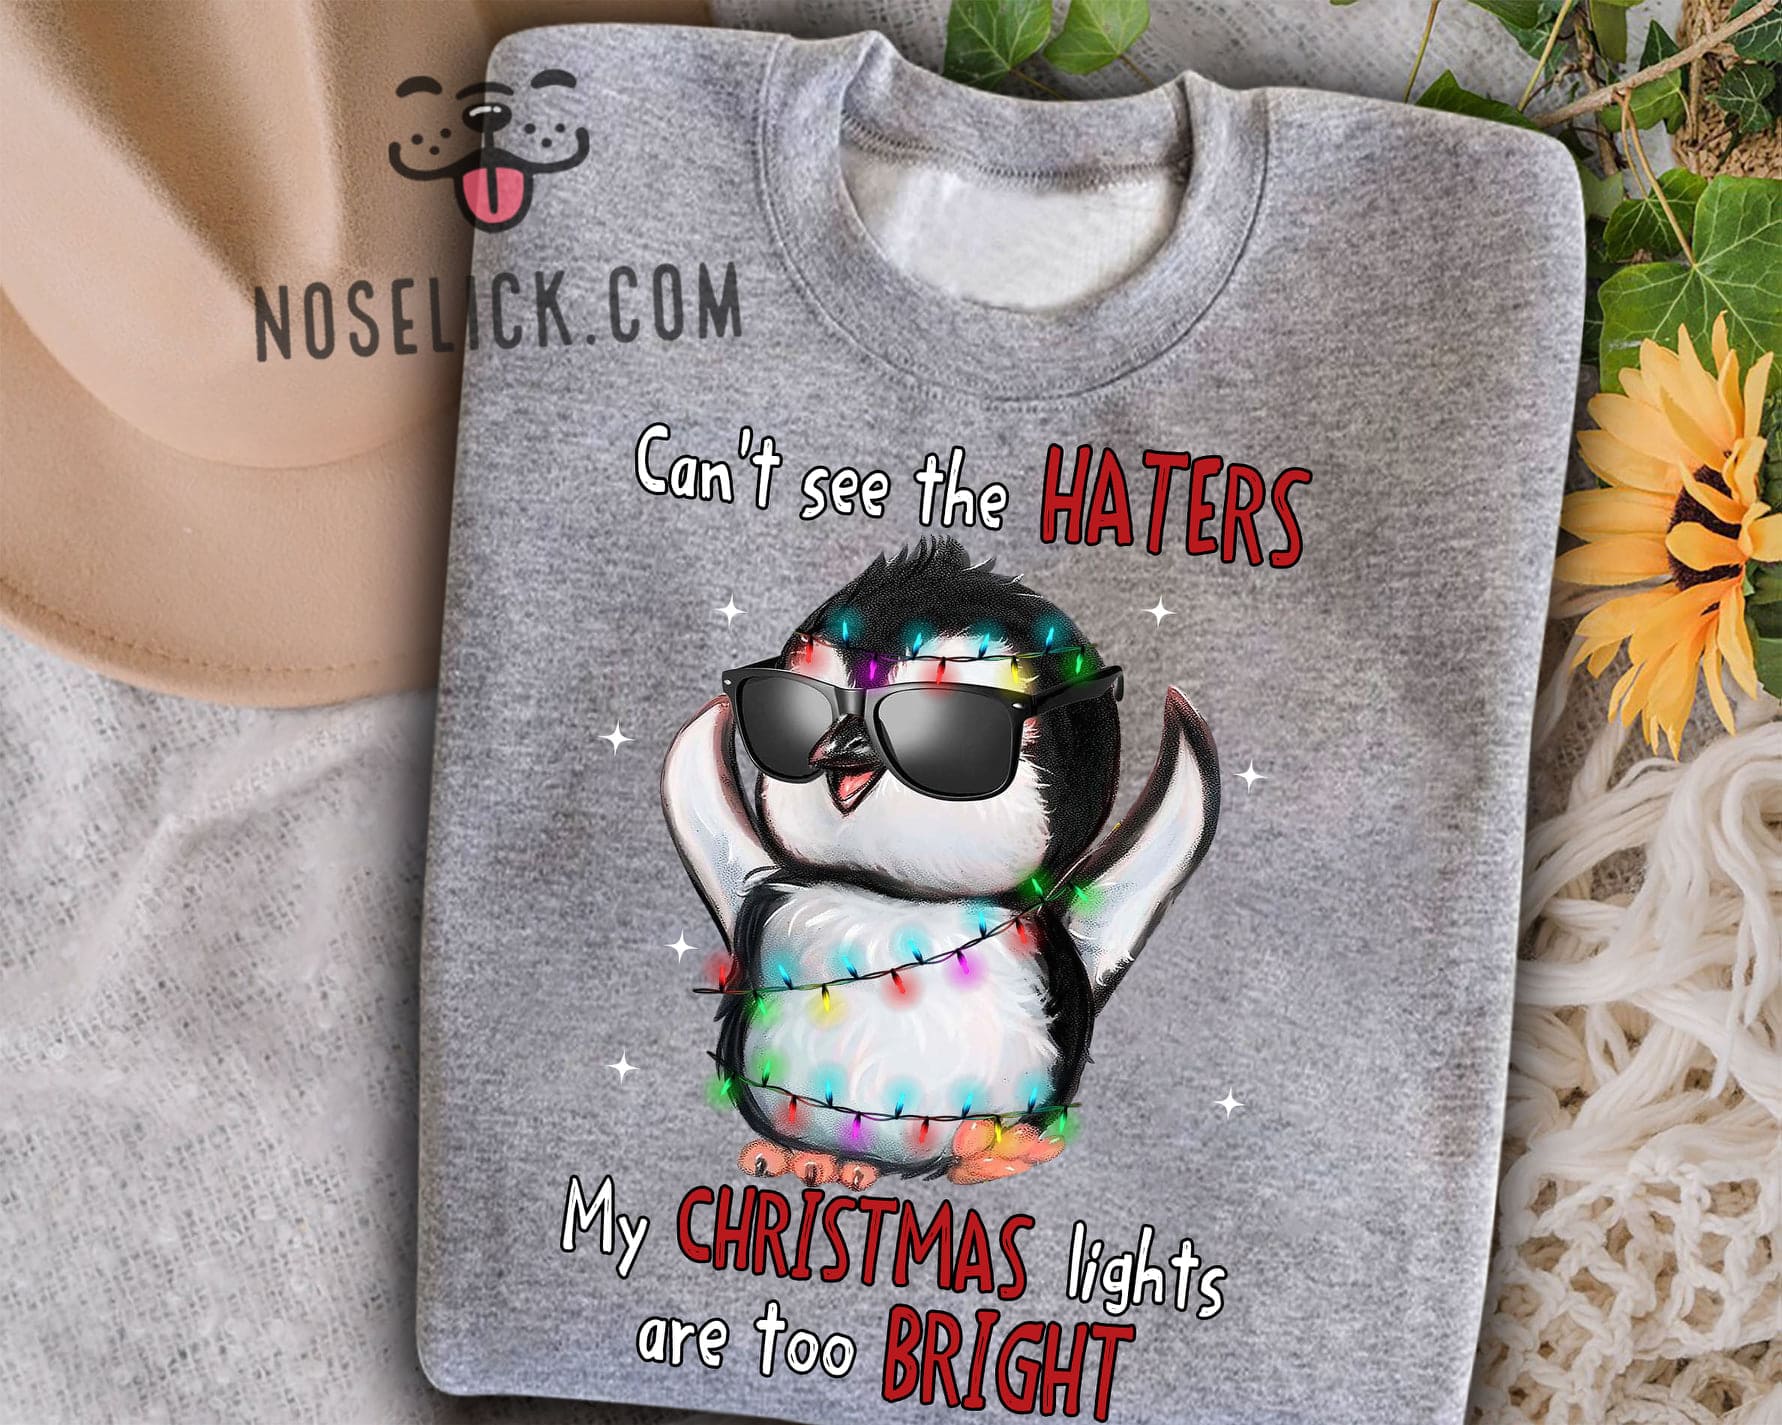 Can't see the haters, my Christmas lights are too bright - Penguin wearing sunglasses, Christmas ugly sweater